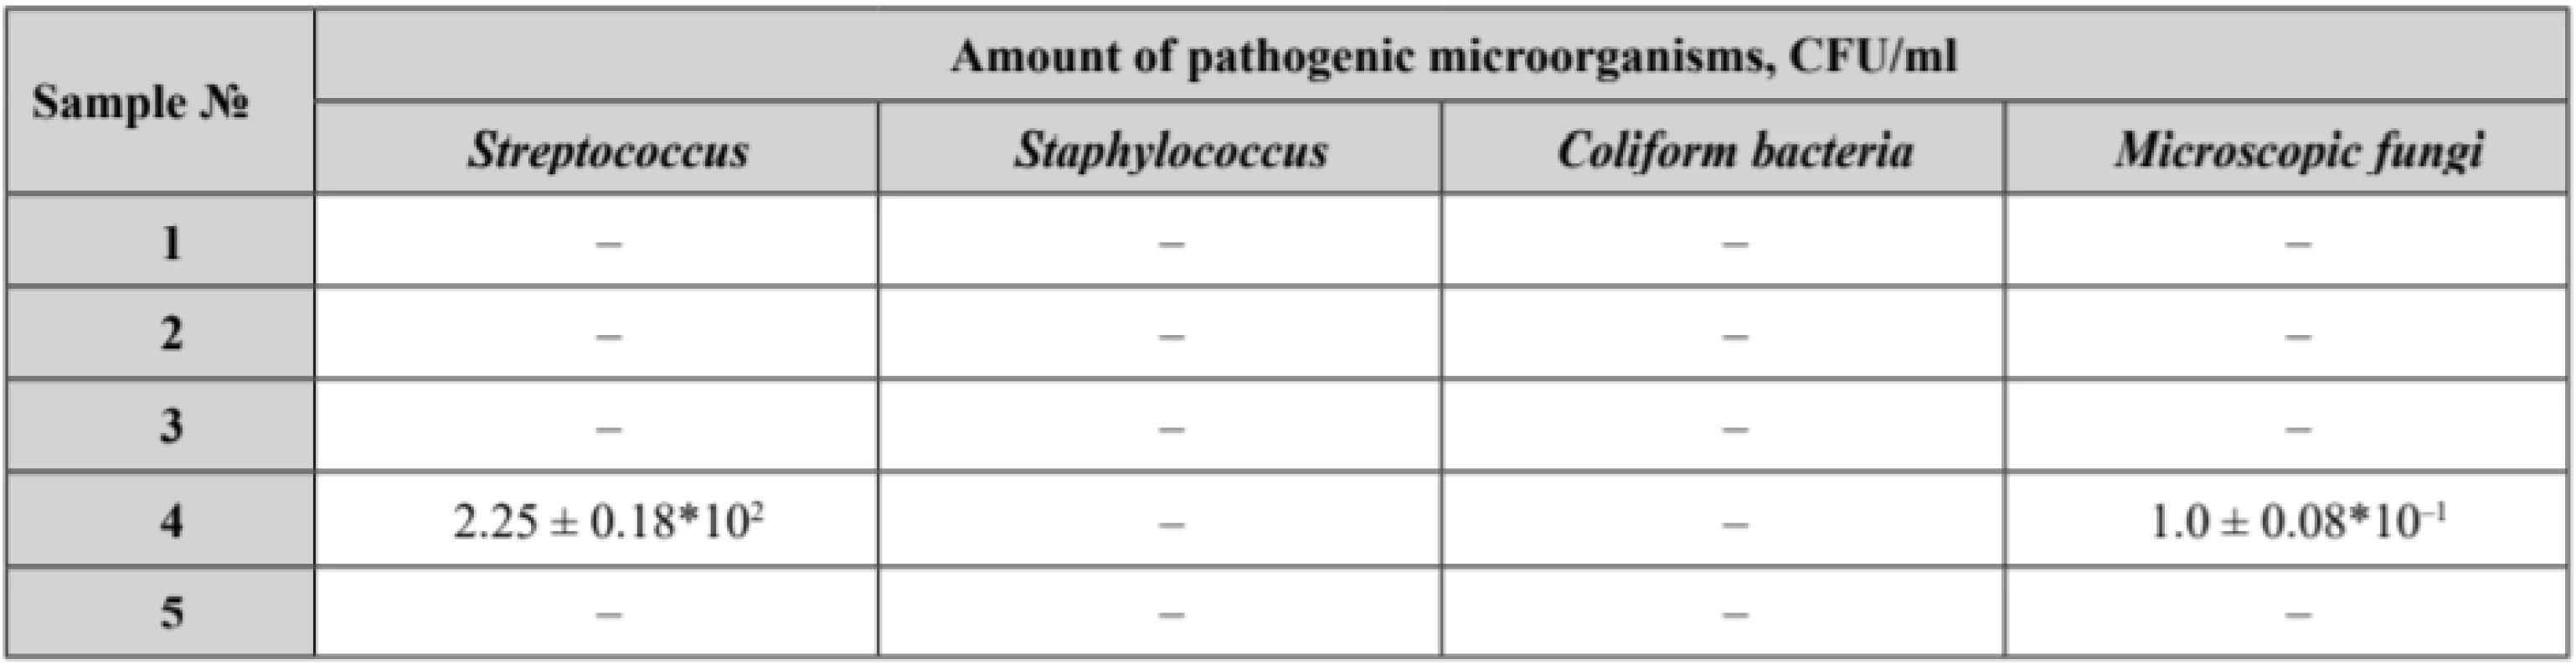 Microbiological purity test results of the experimental samples